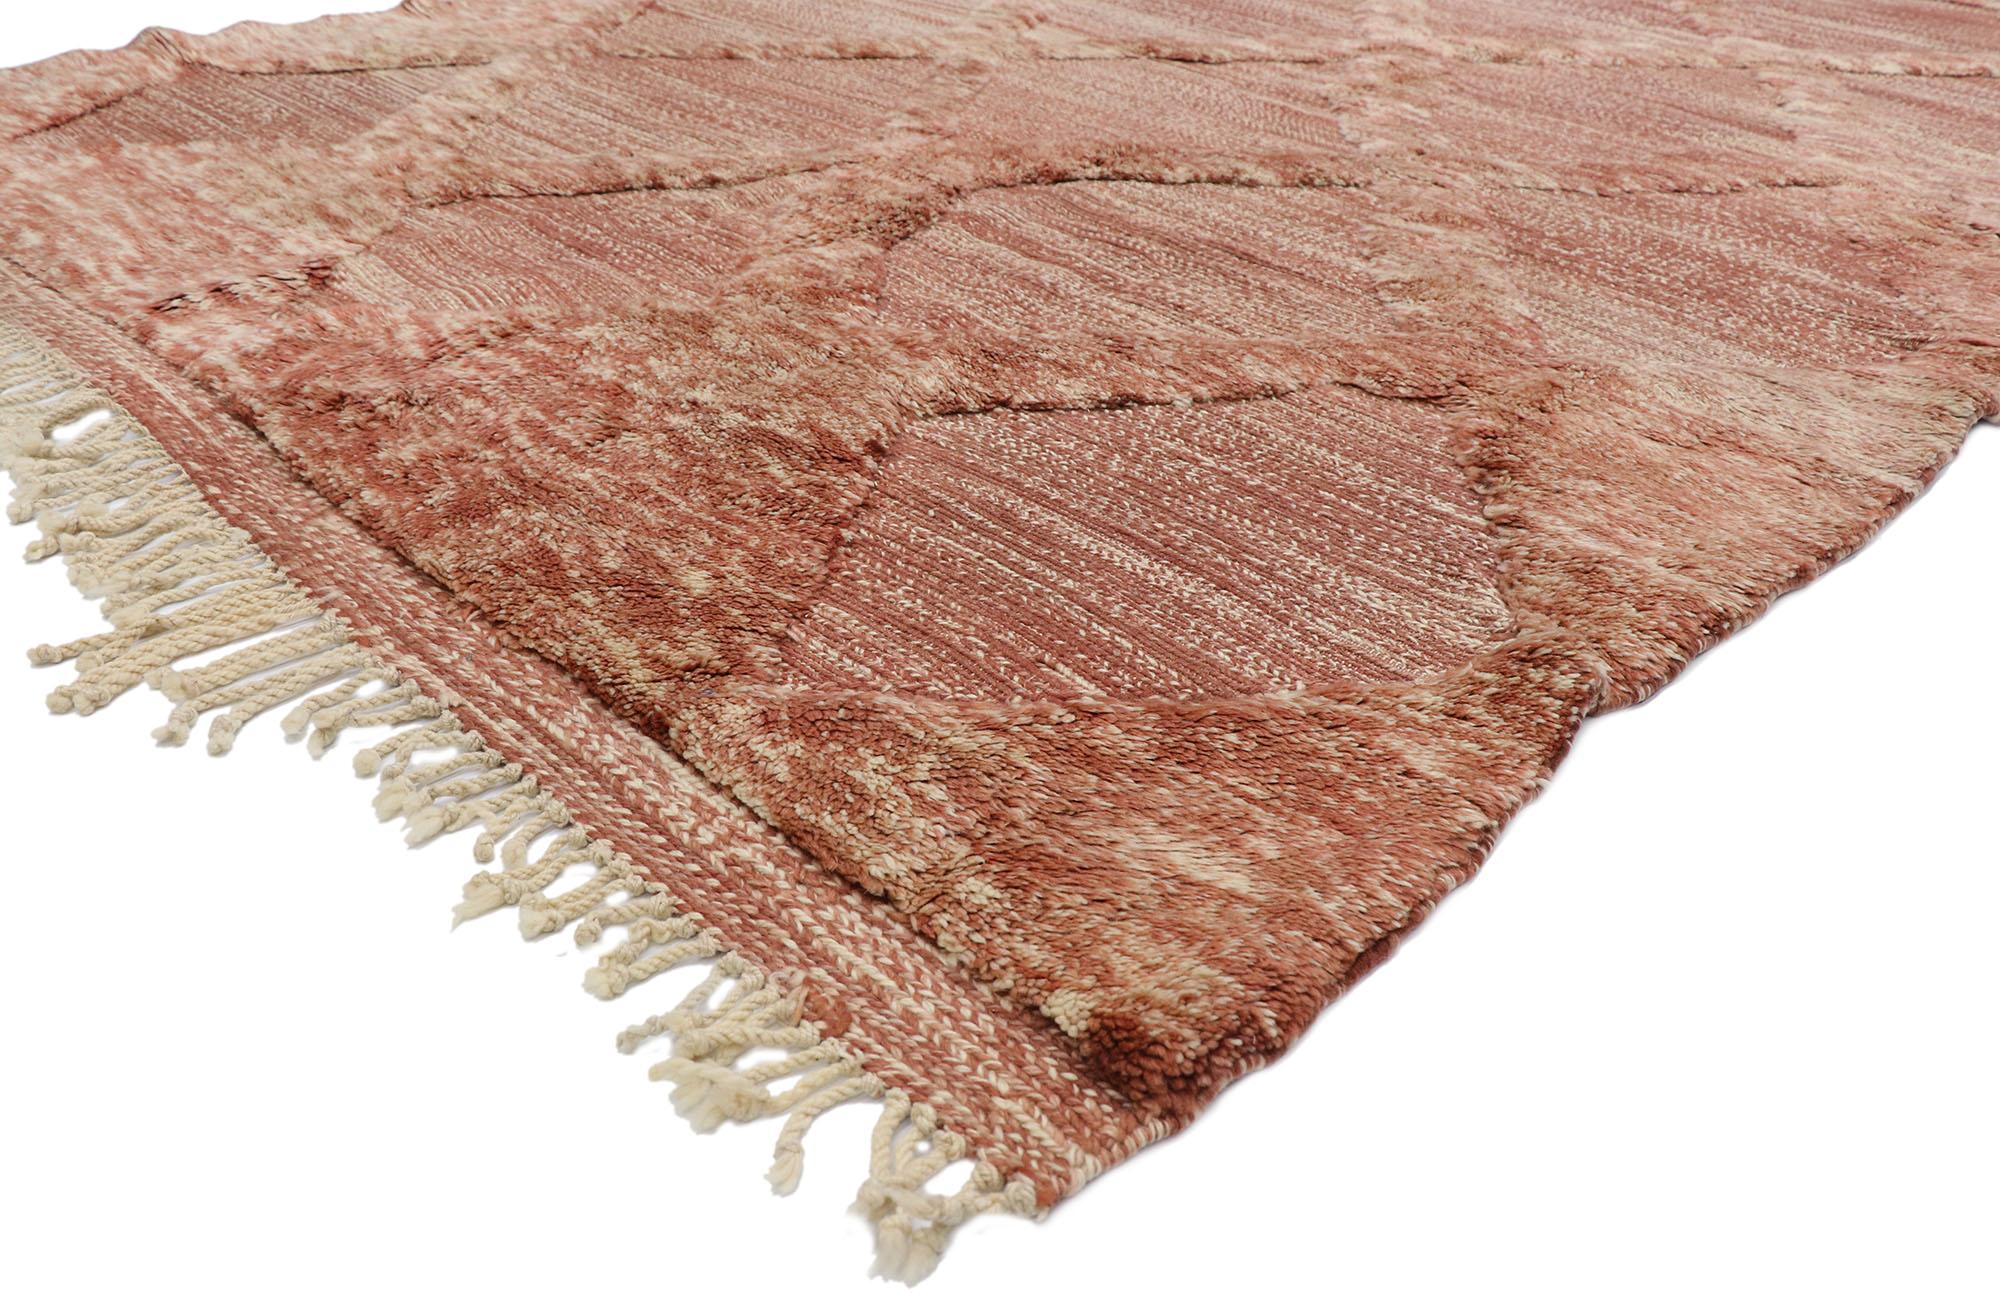 21159 new Contemporary Berber Moroccan Souf Kilim rug with Rustic Boho style 07'01 x 09'10. With a strong sense of dimensionality and asymmetry, this hand-woven contemporary Berber Moroccan Kilim rug is engaging, yet well balanced creating a